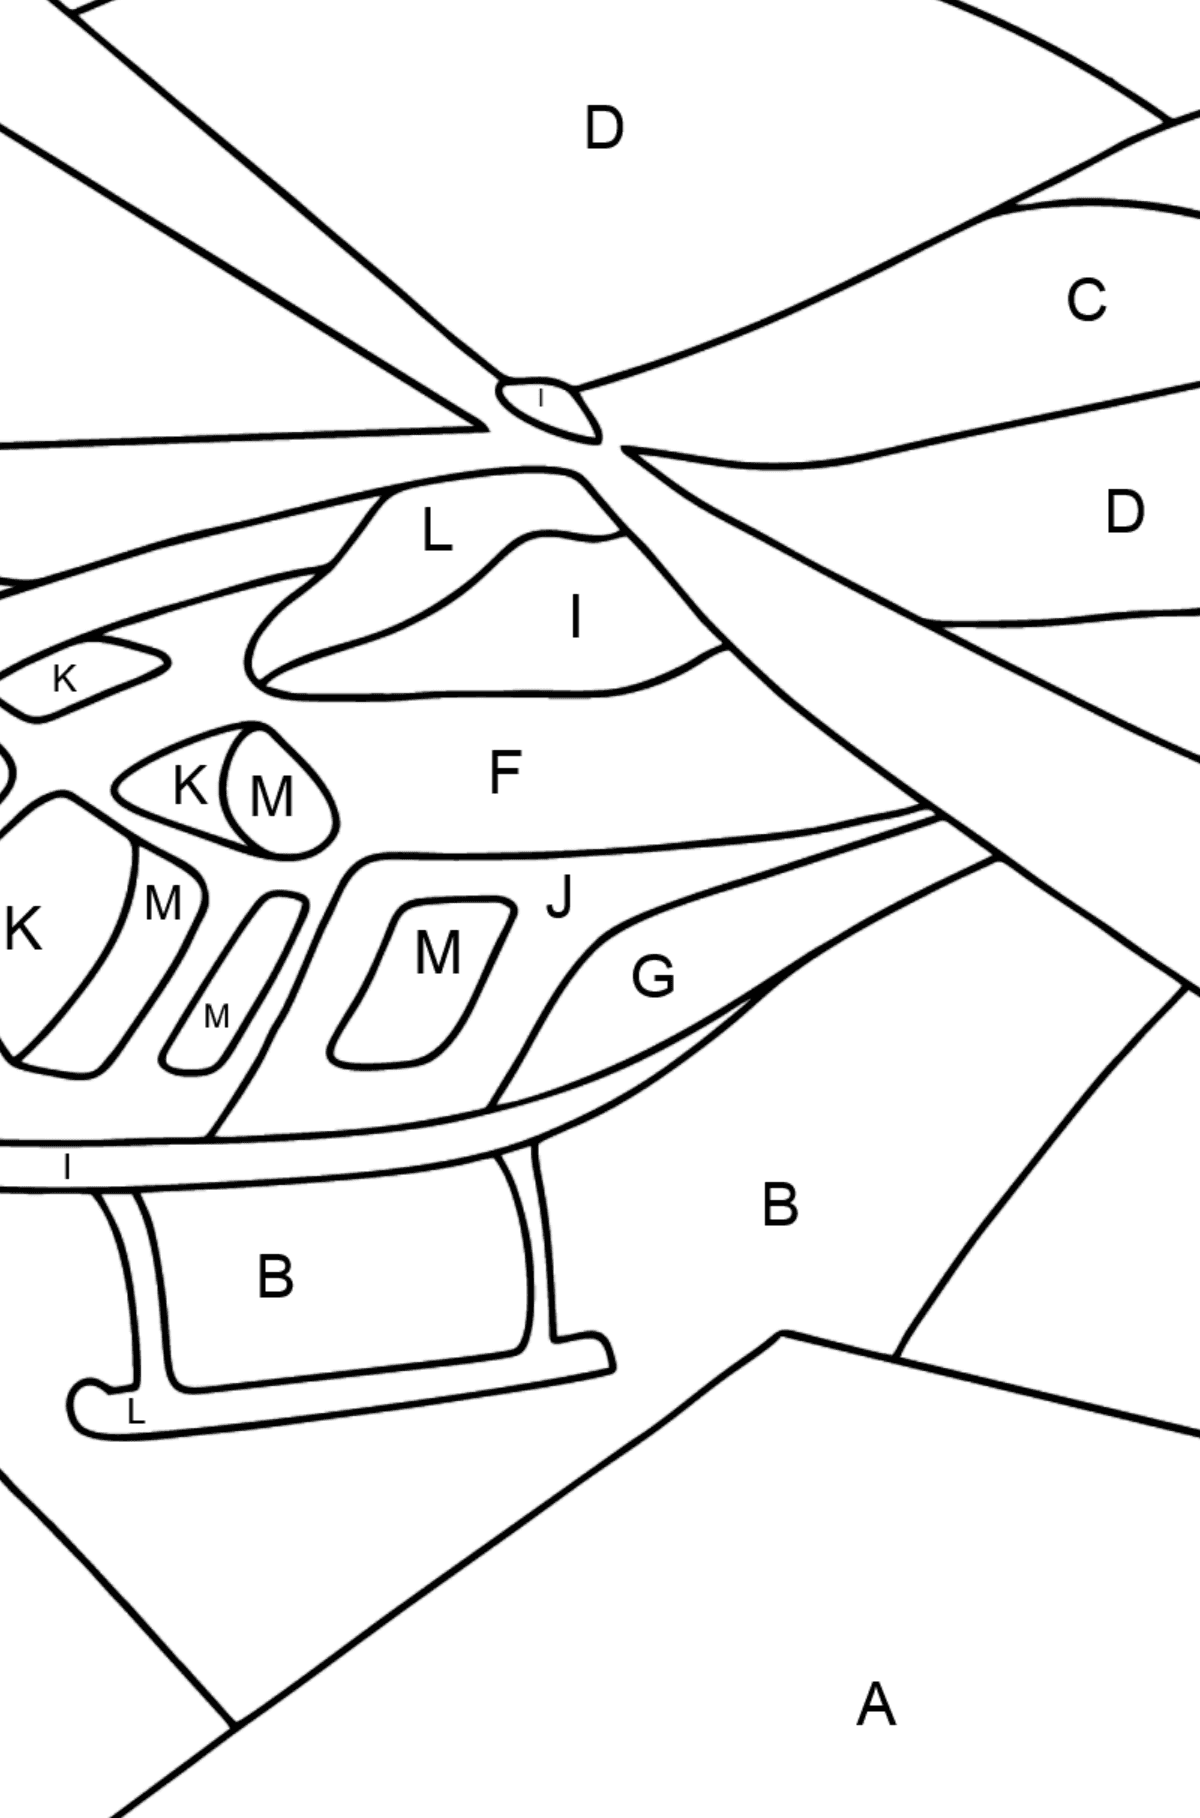 Coloring Page - A Sport Helicopter - Coloring by Letters for Kids